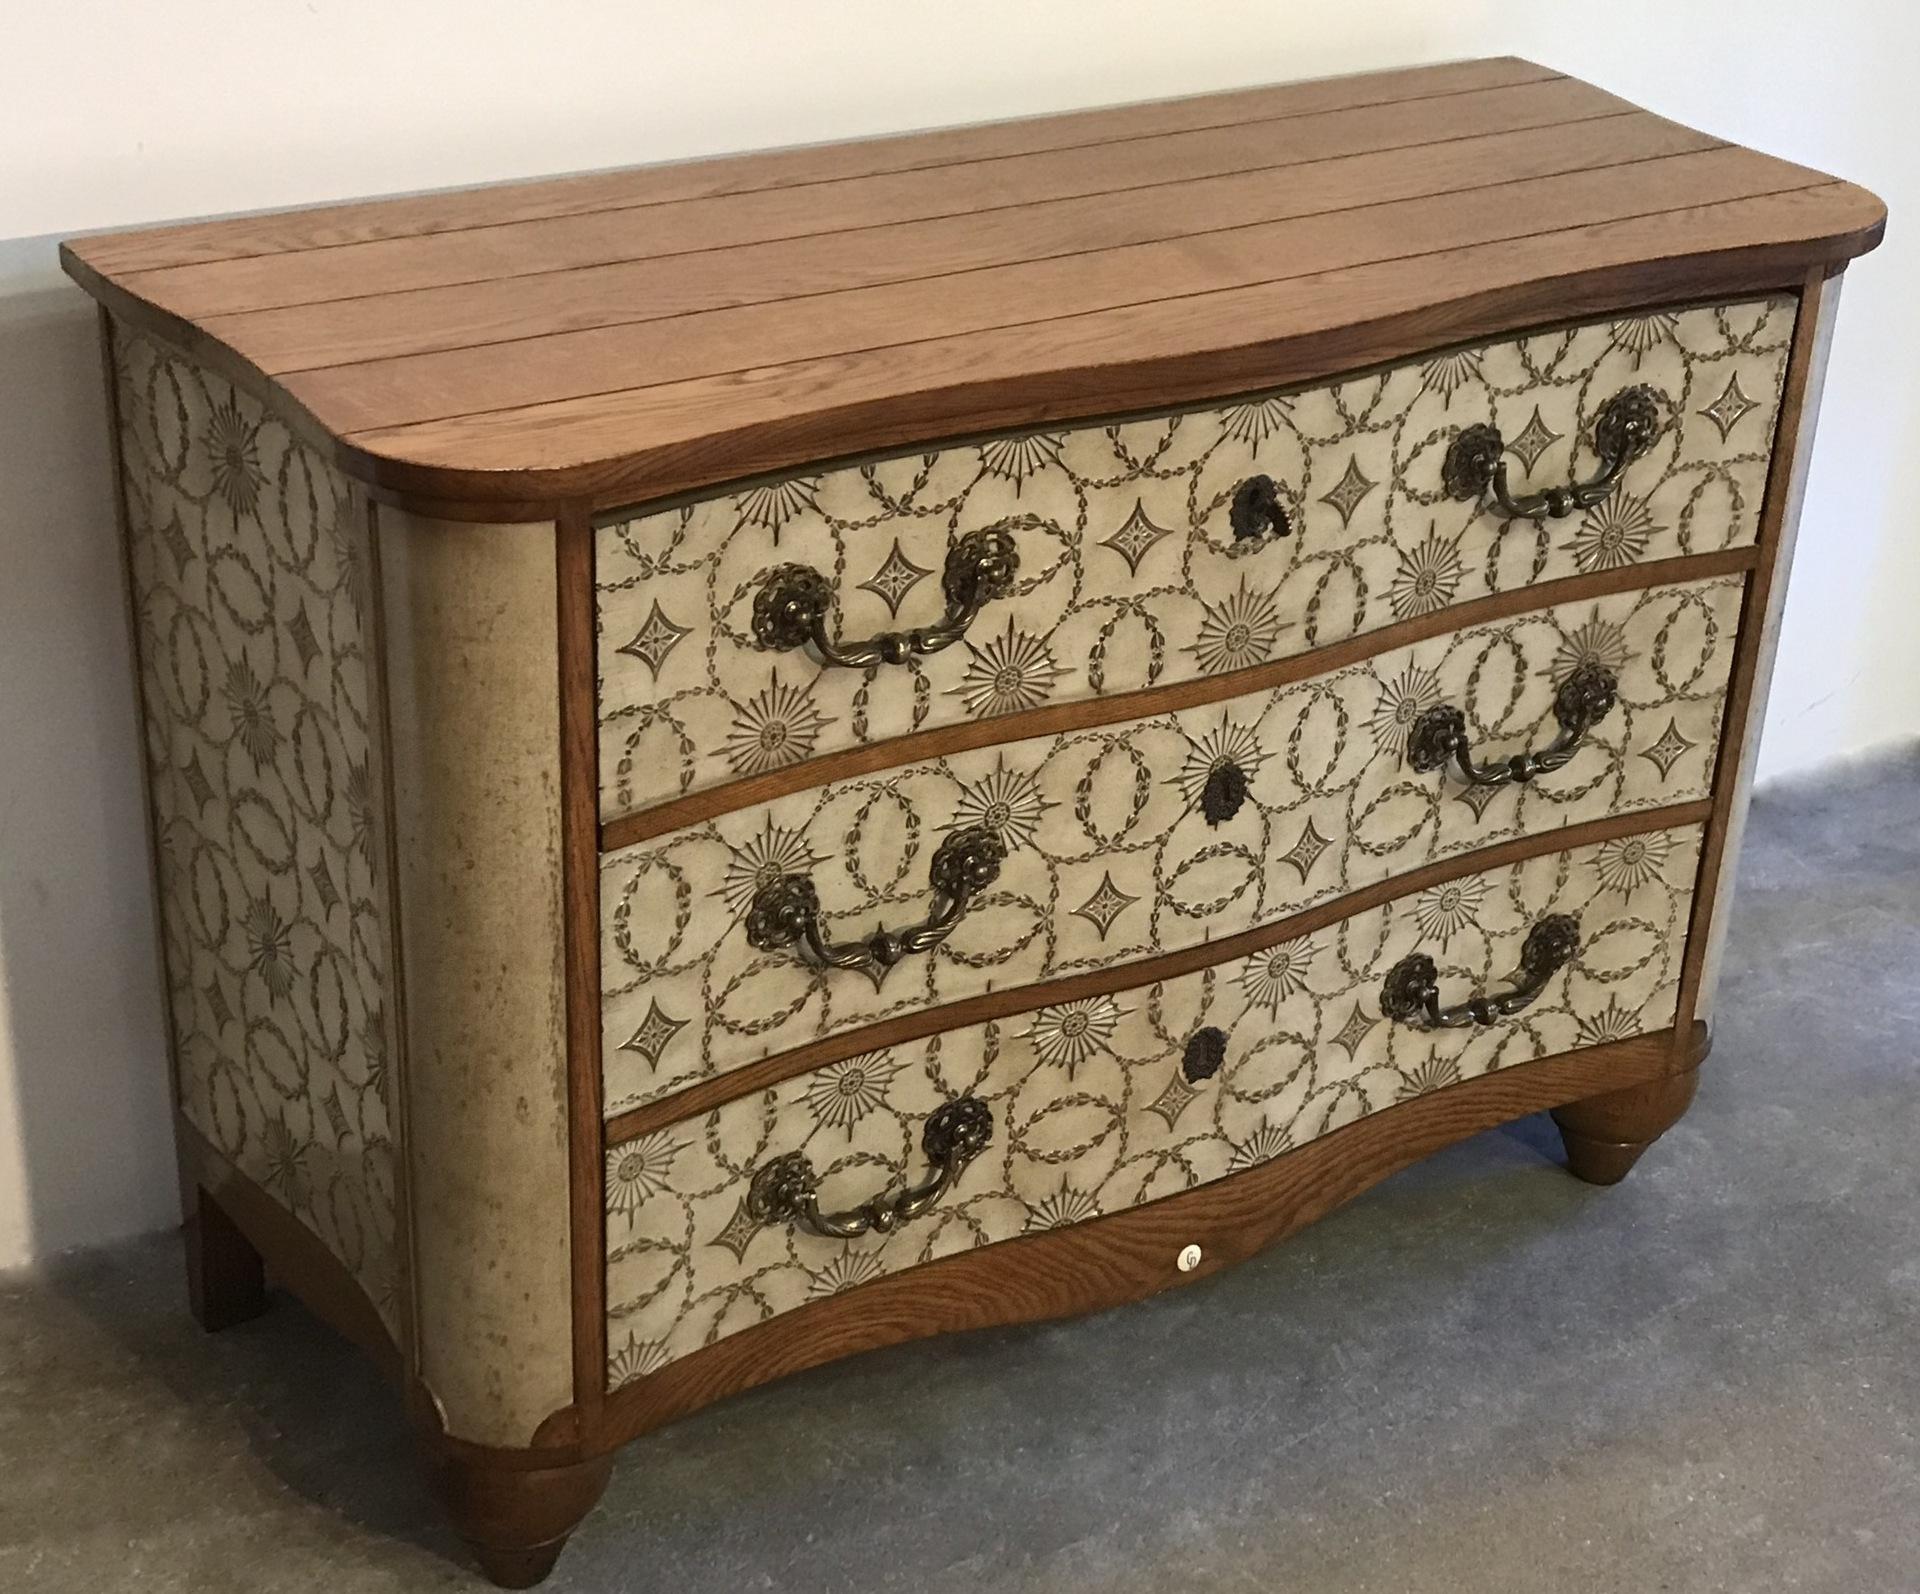 This ornate 1950s three-drawer chest was custom designed for Christian Dior for his Paris office on Avenue Montaigne for many years.
The sides and drawers are made of oak, finished with Coromandel lacquer and embossed classical pattern.
A great